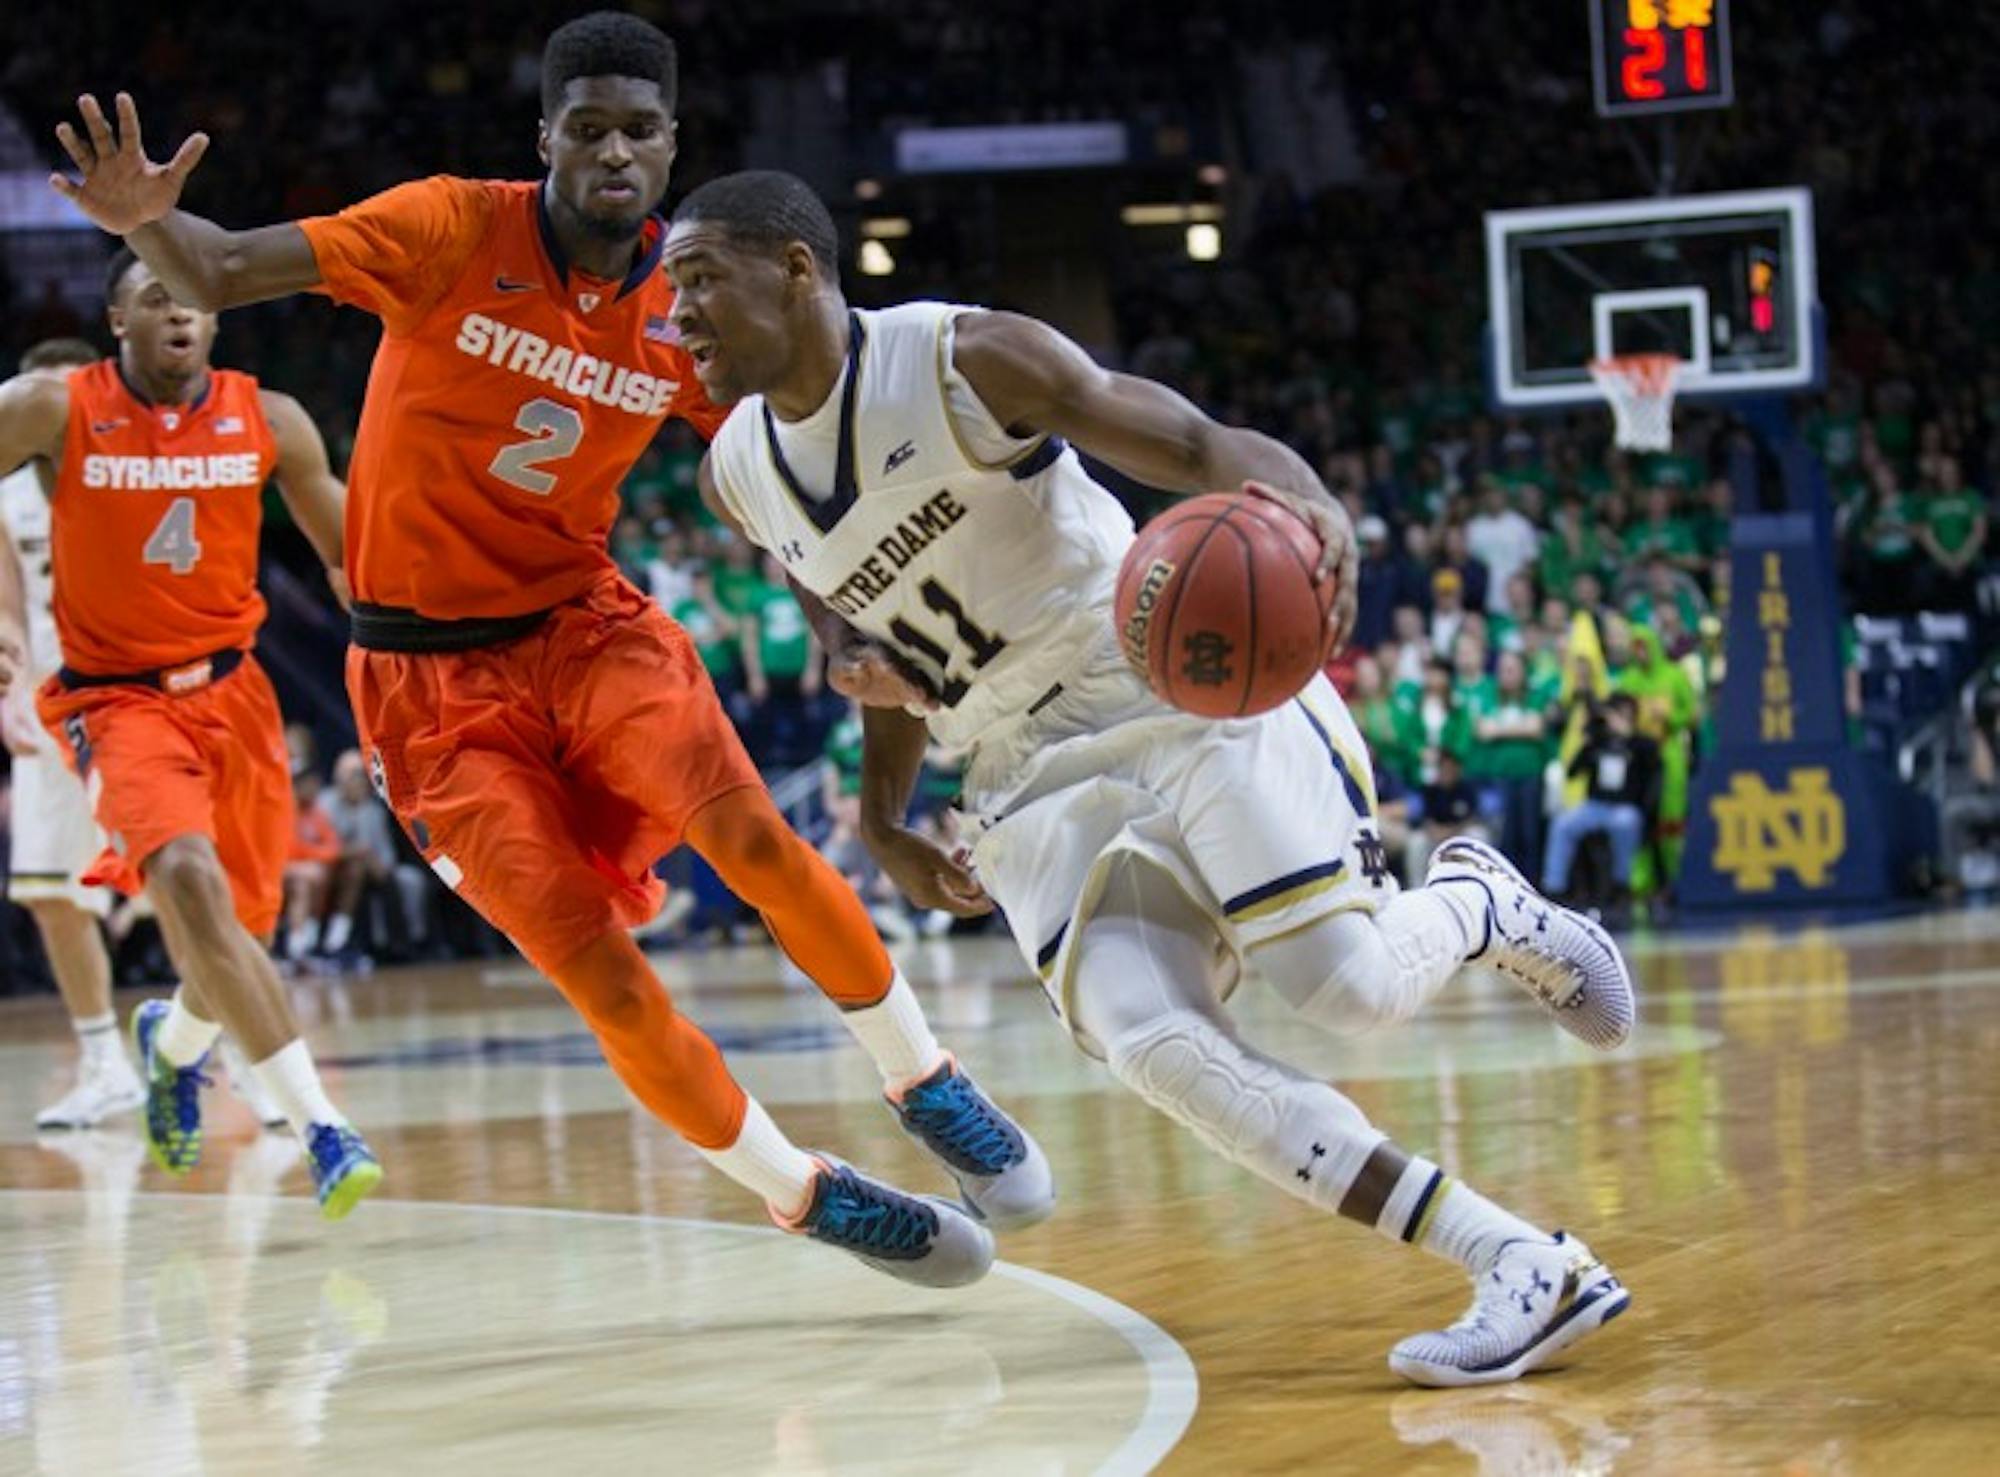 Irish sophomore guard Demetrius Jackson drives by a defender during Notre Dame's 65-60 loss to Syracuse.